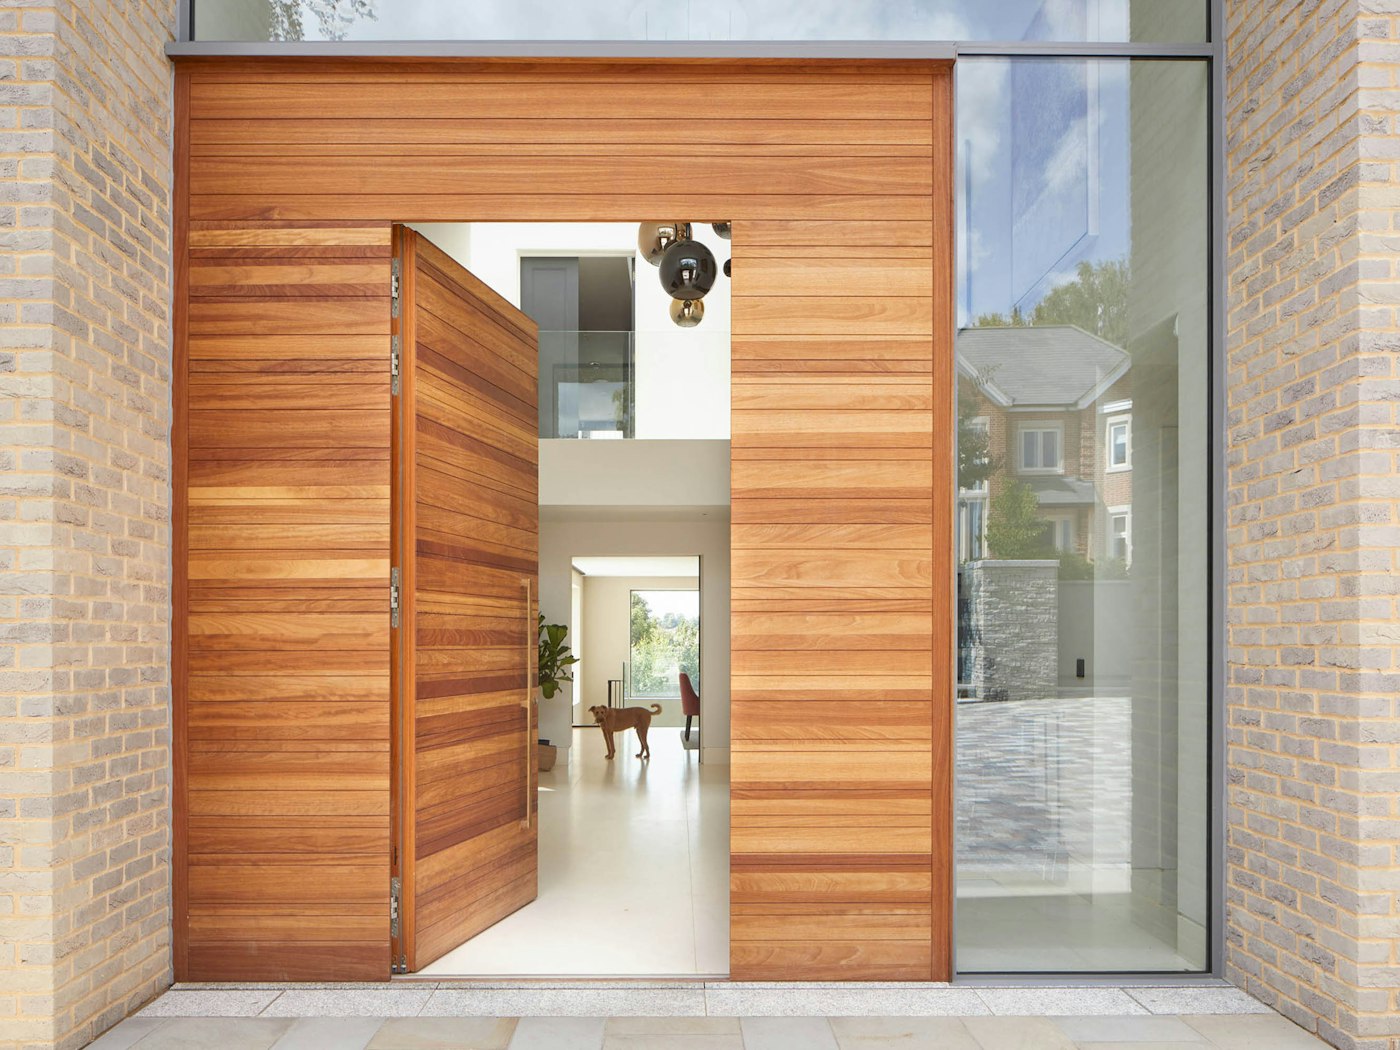 This Rondo (horizontal grooves) in iroko has matching side & overhead wood panels which creates an extra-imposing entrance